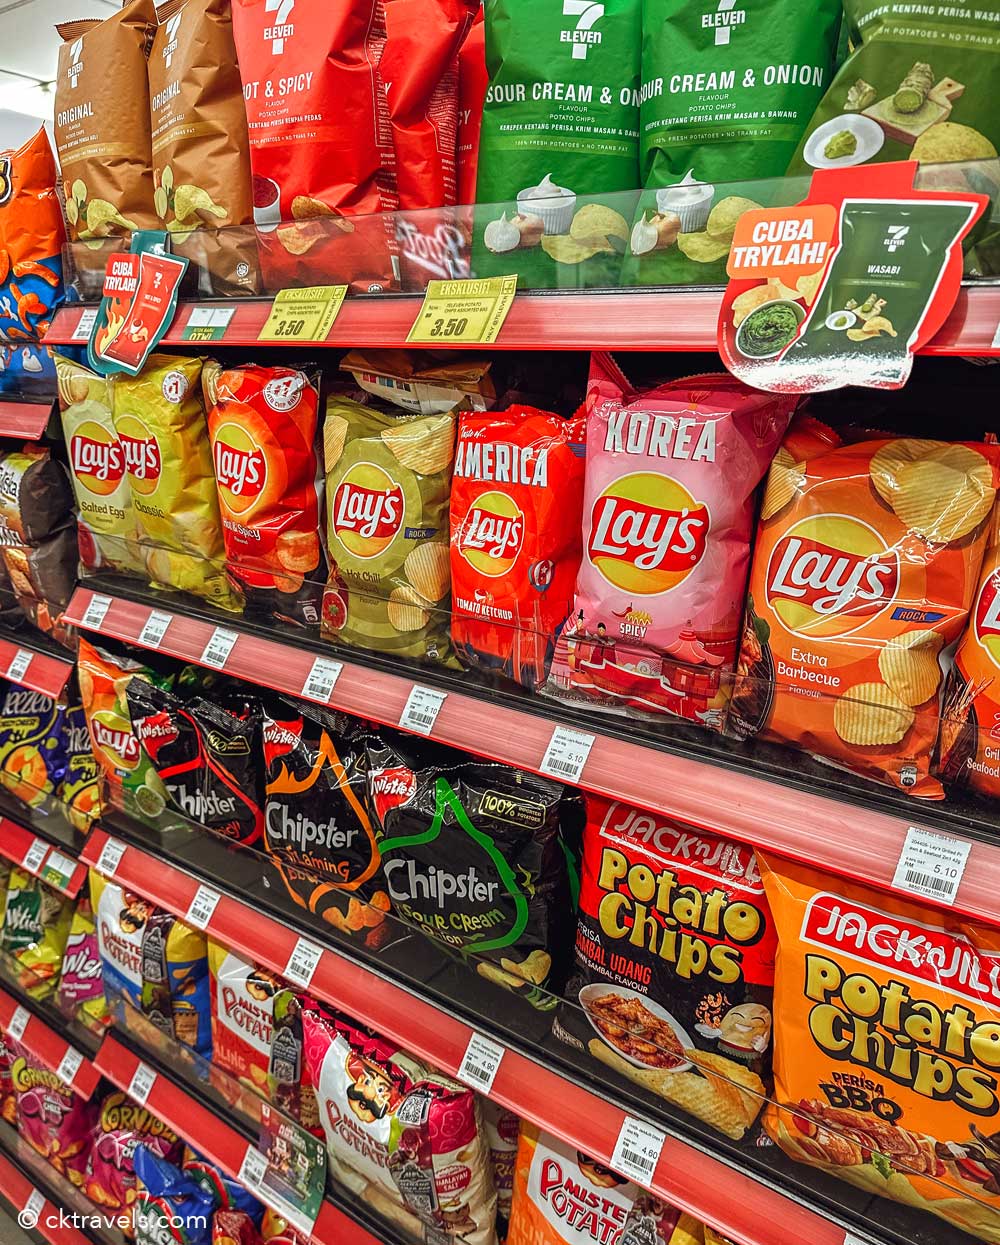 Malaysia 7-Eleven Stores - lays potato chips